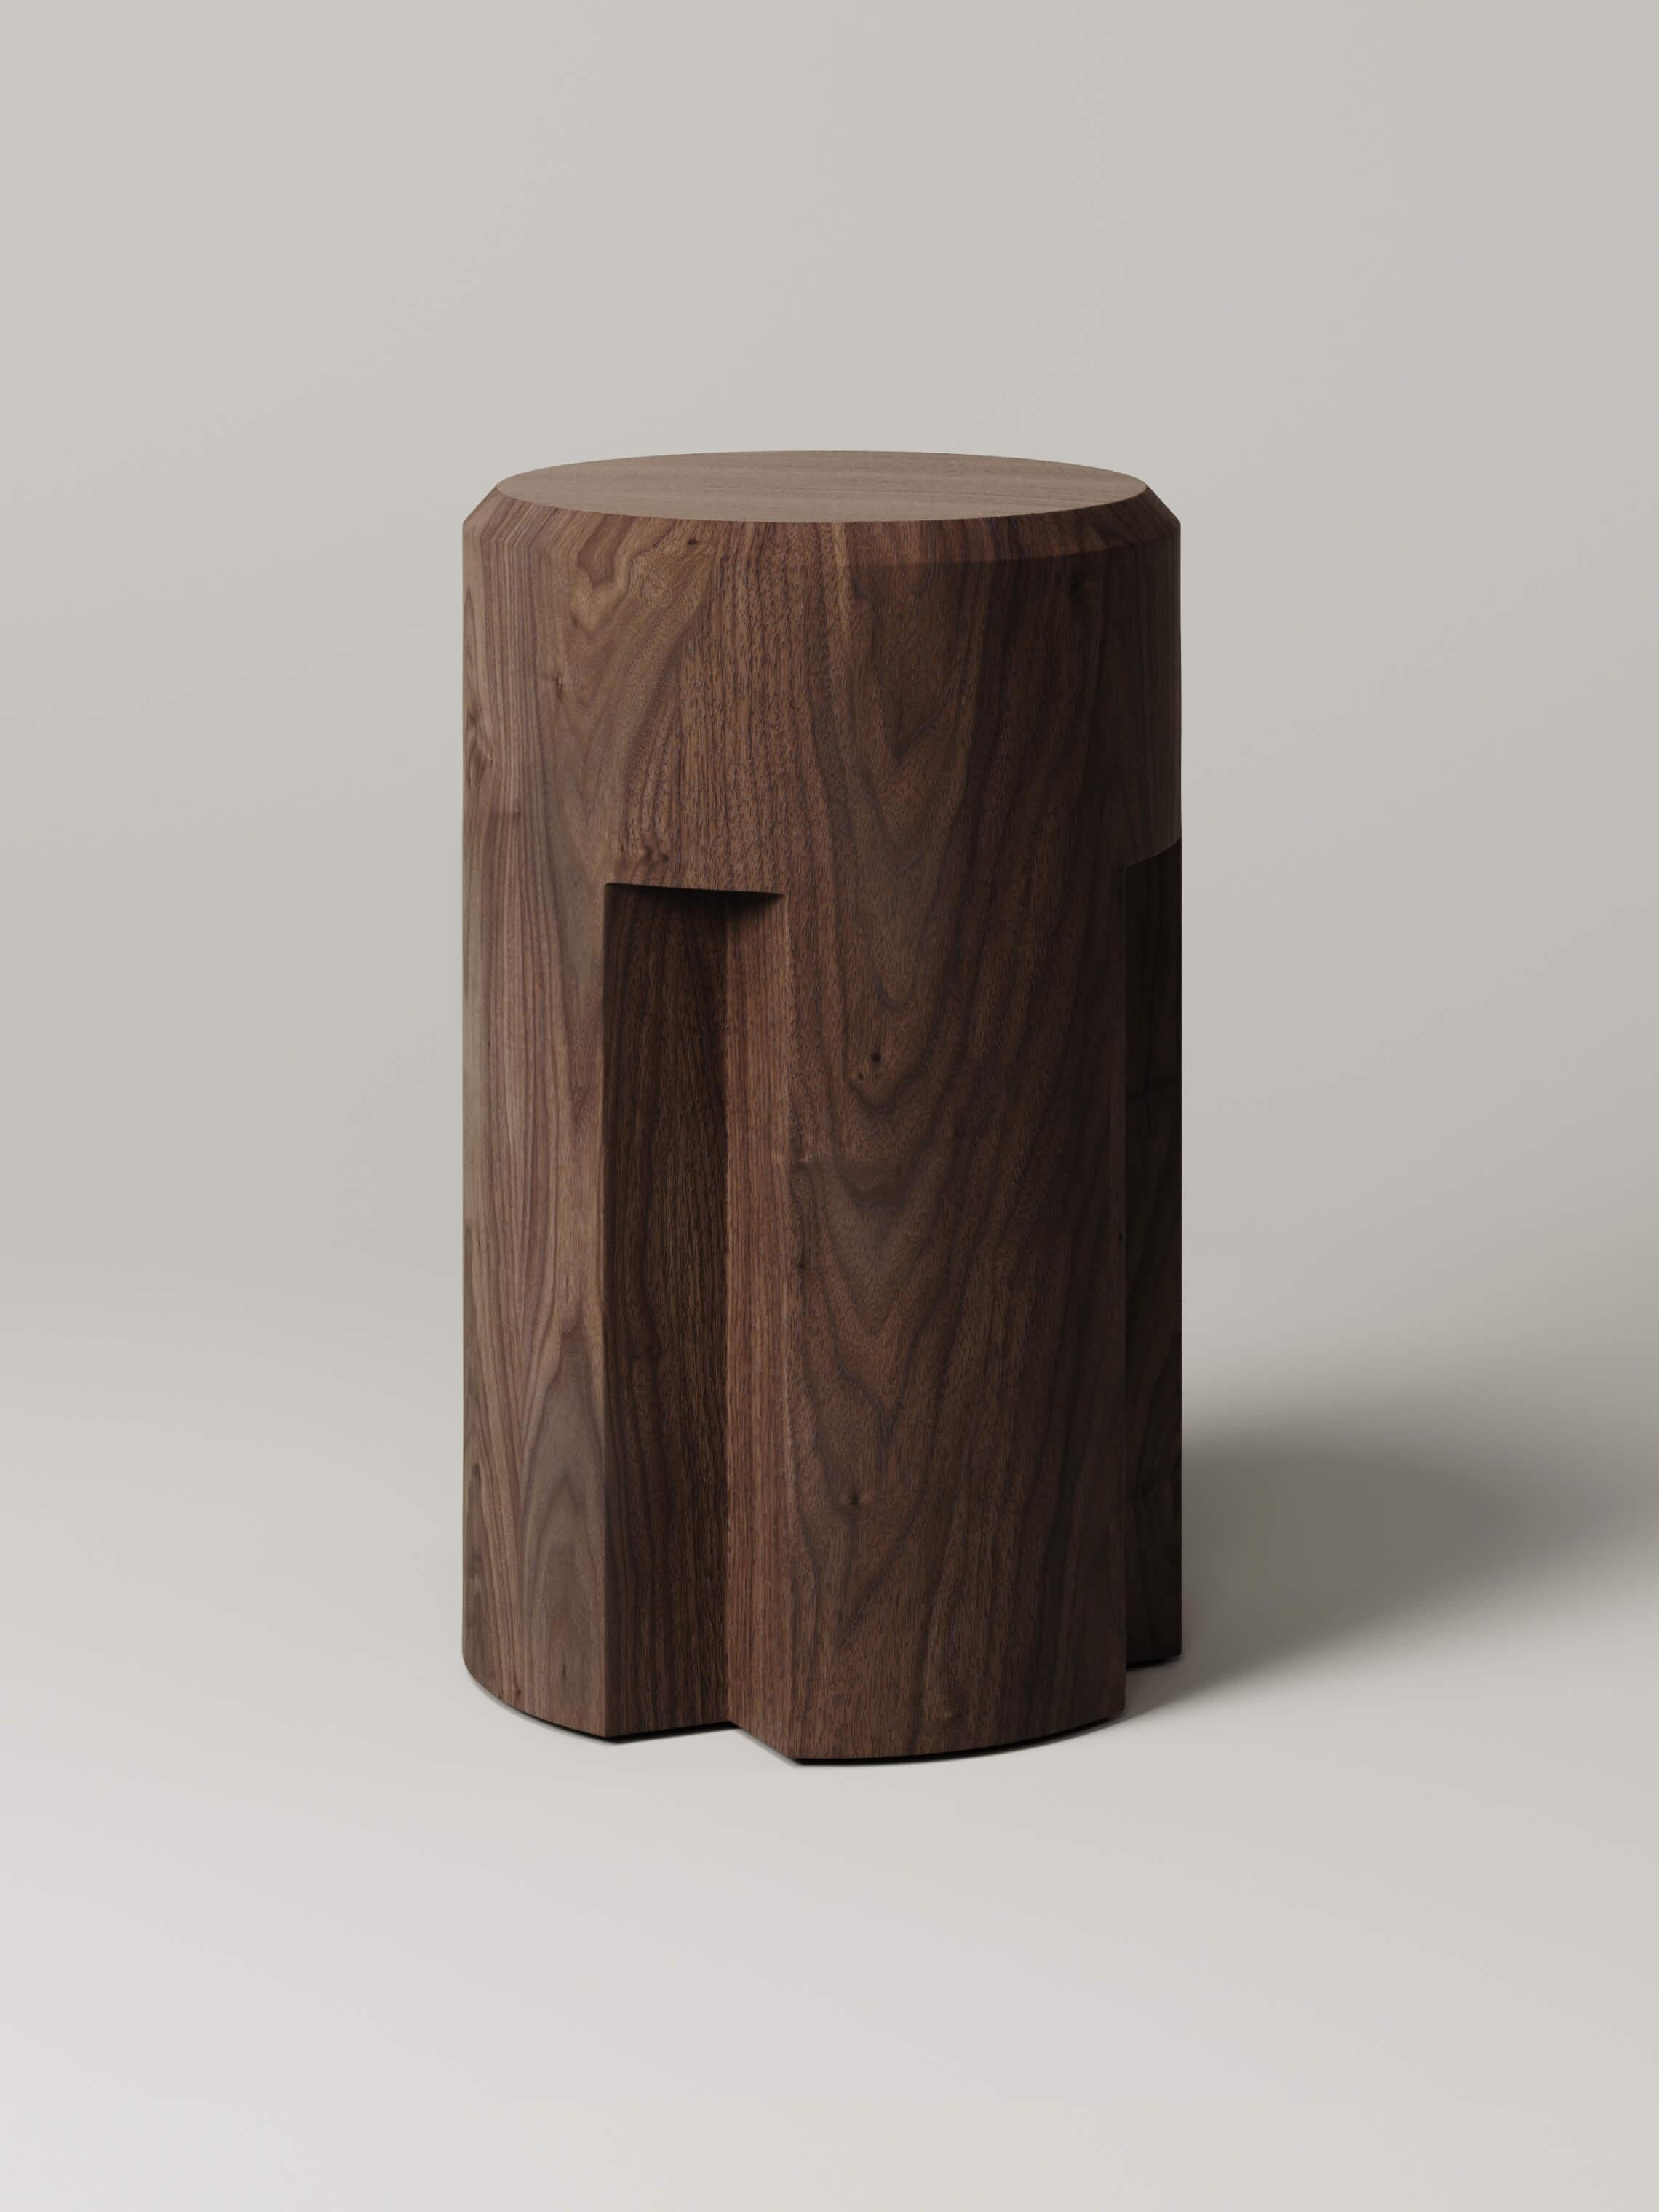 M_003 Counter Stool designed by Studio Le Cann for Monolith Studio, Travertine For Sale 1